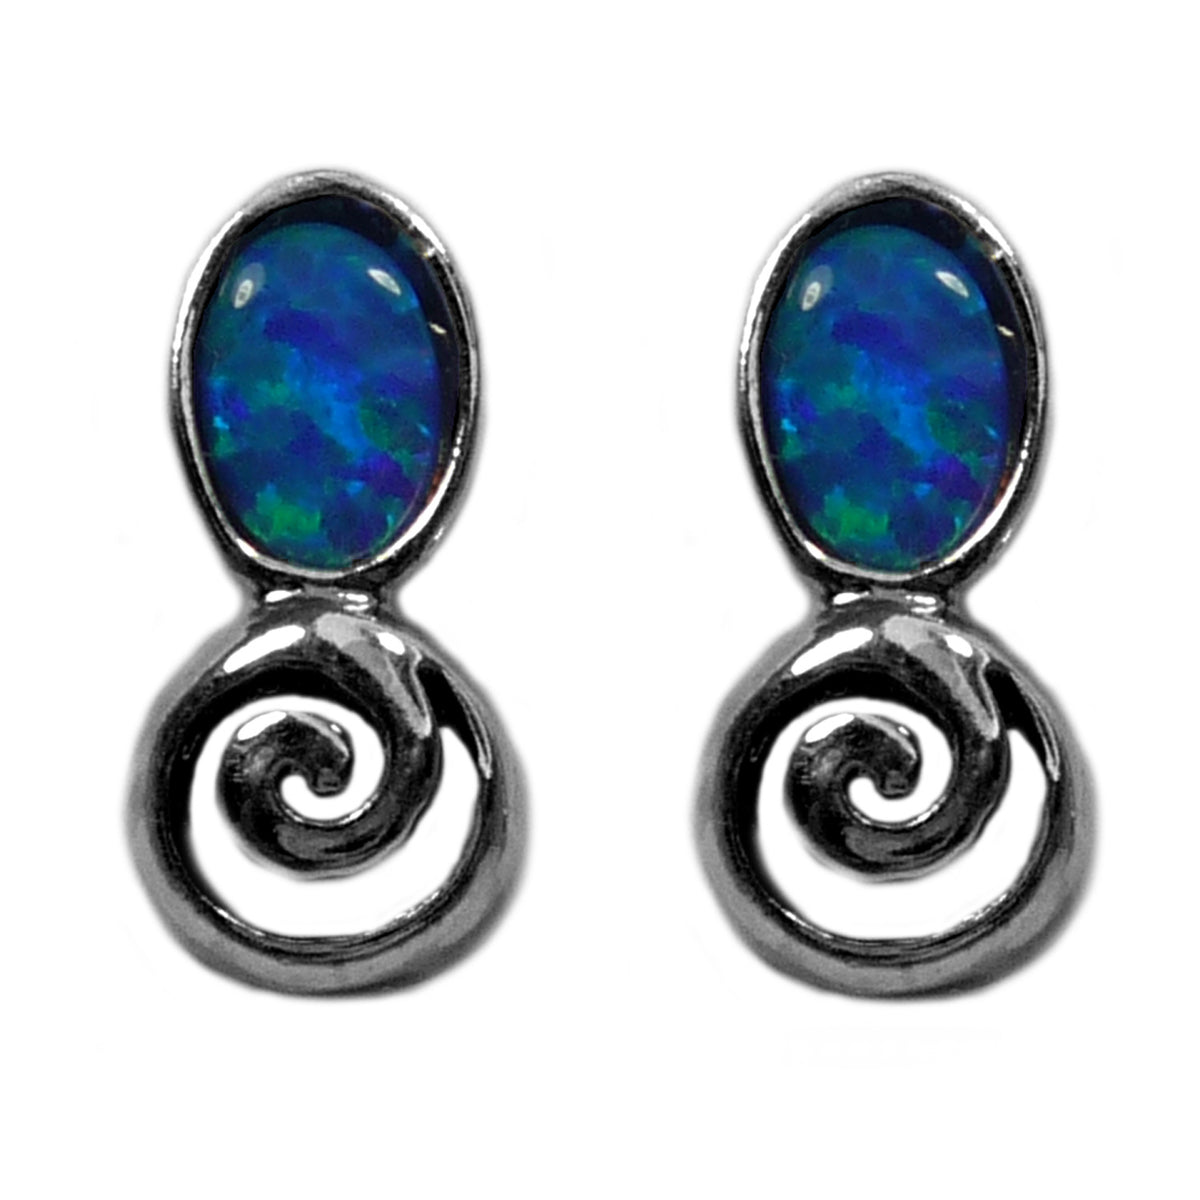 Sterling Silver Rhodium Plated Greek Spiral Key With Synthetic Opal Earrings, 5 x 12mm fine designer jewelry for men and women